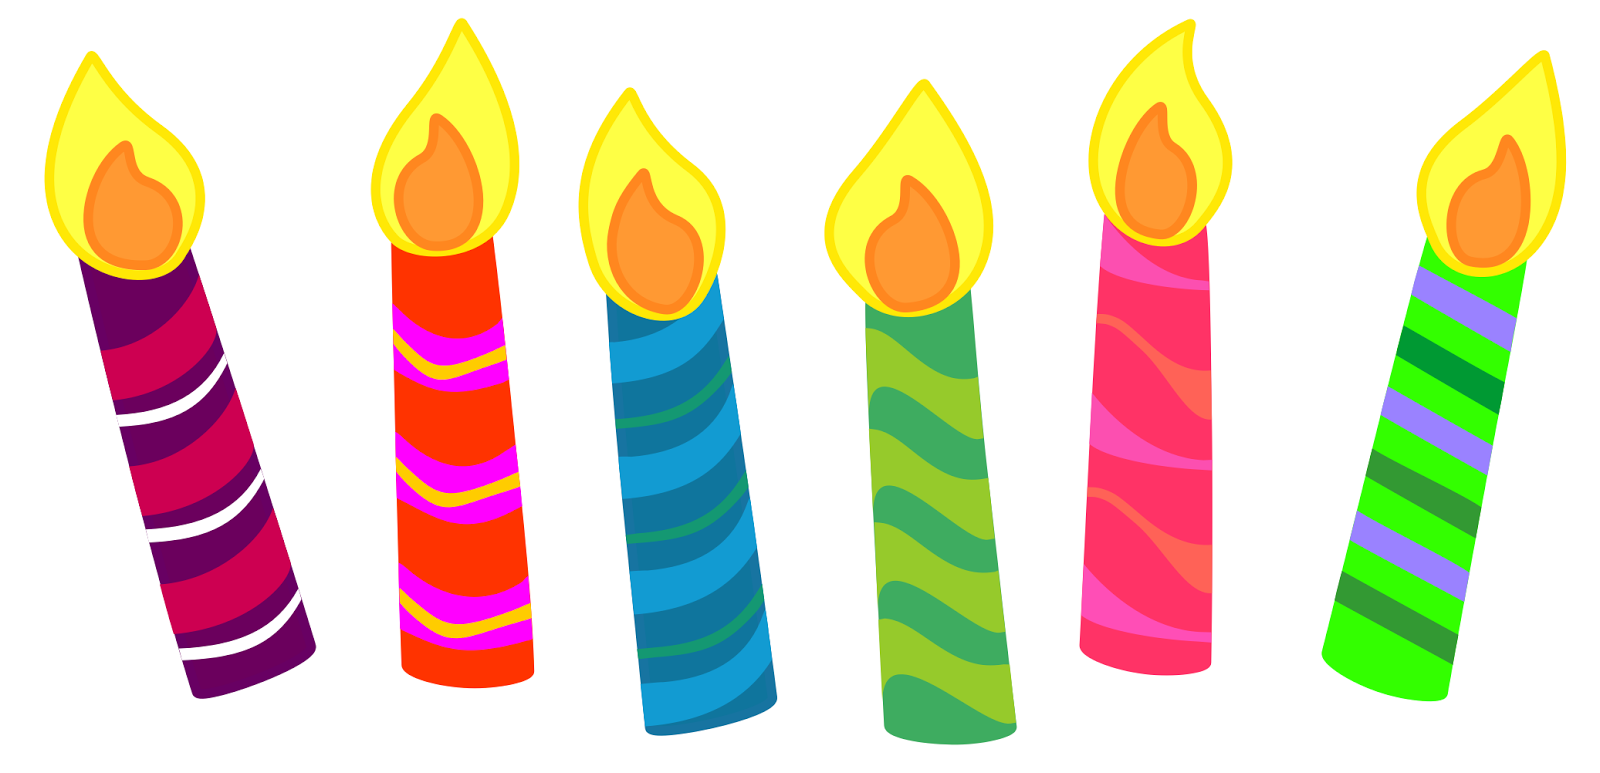 Candles clipart free large im - Candle Images Clip Art